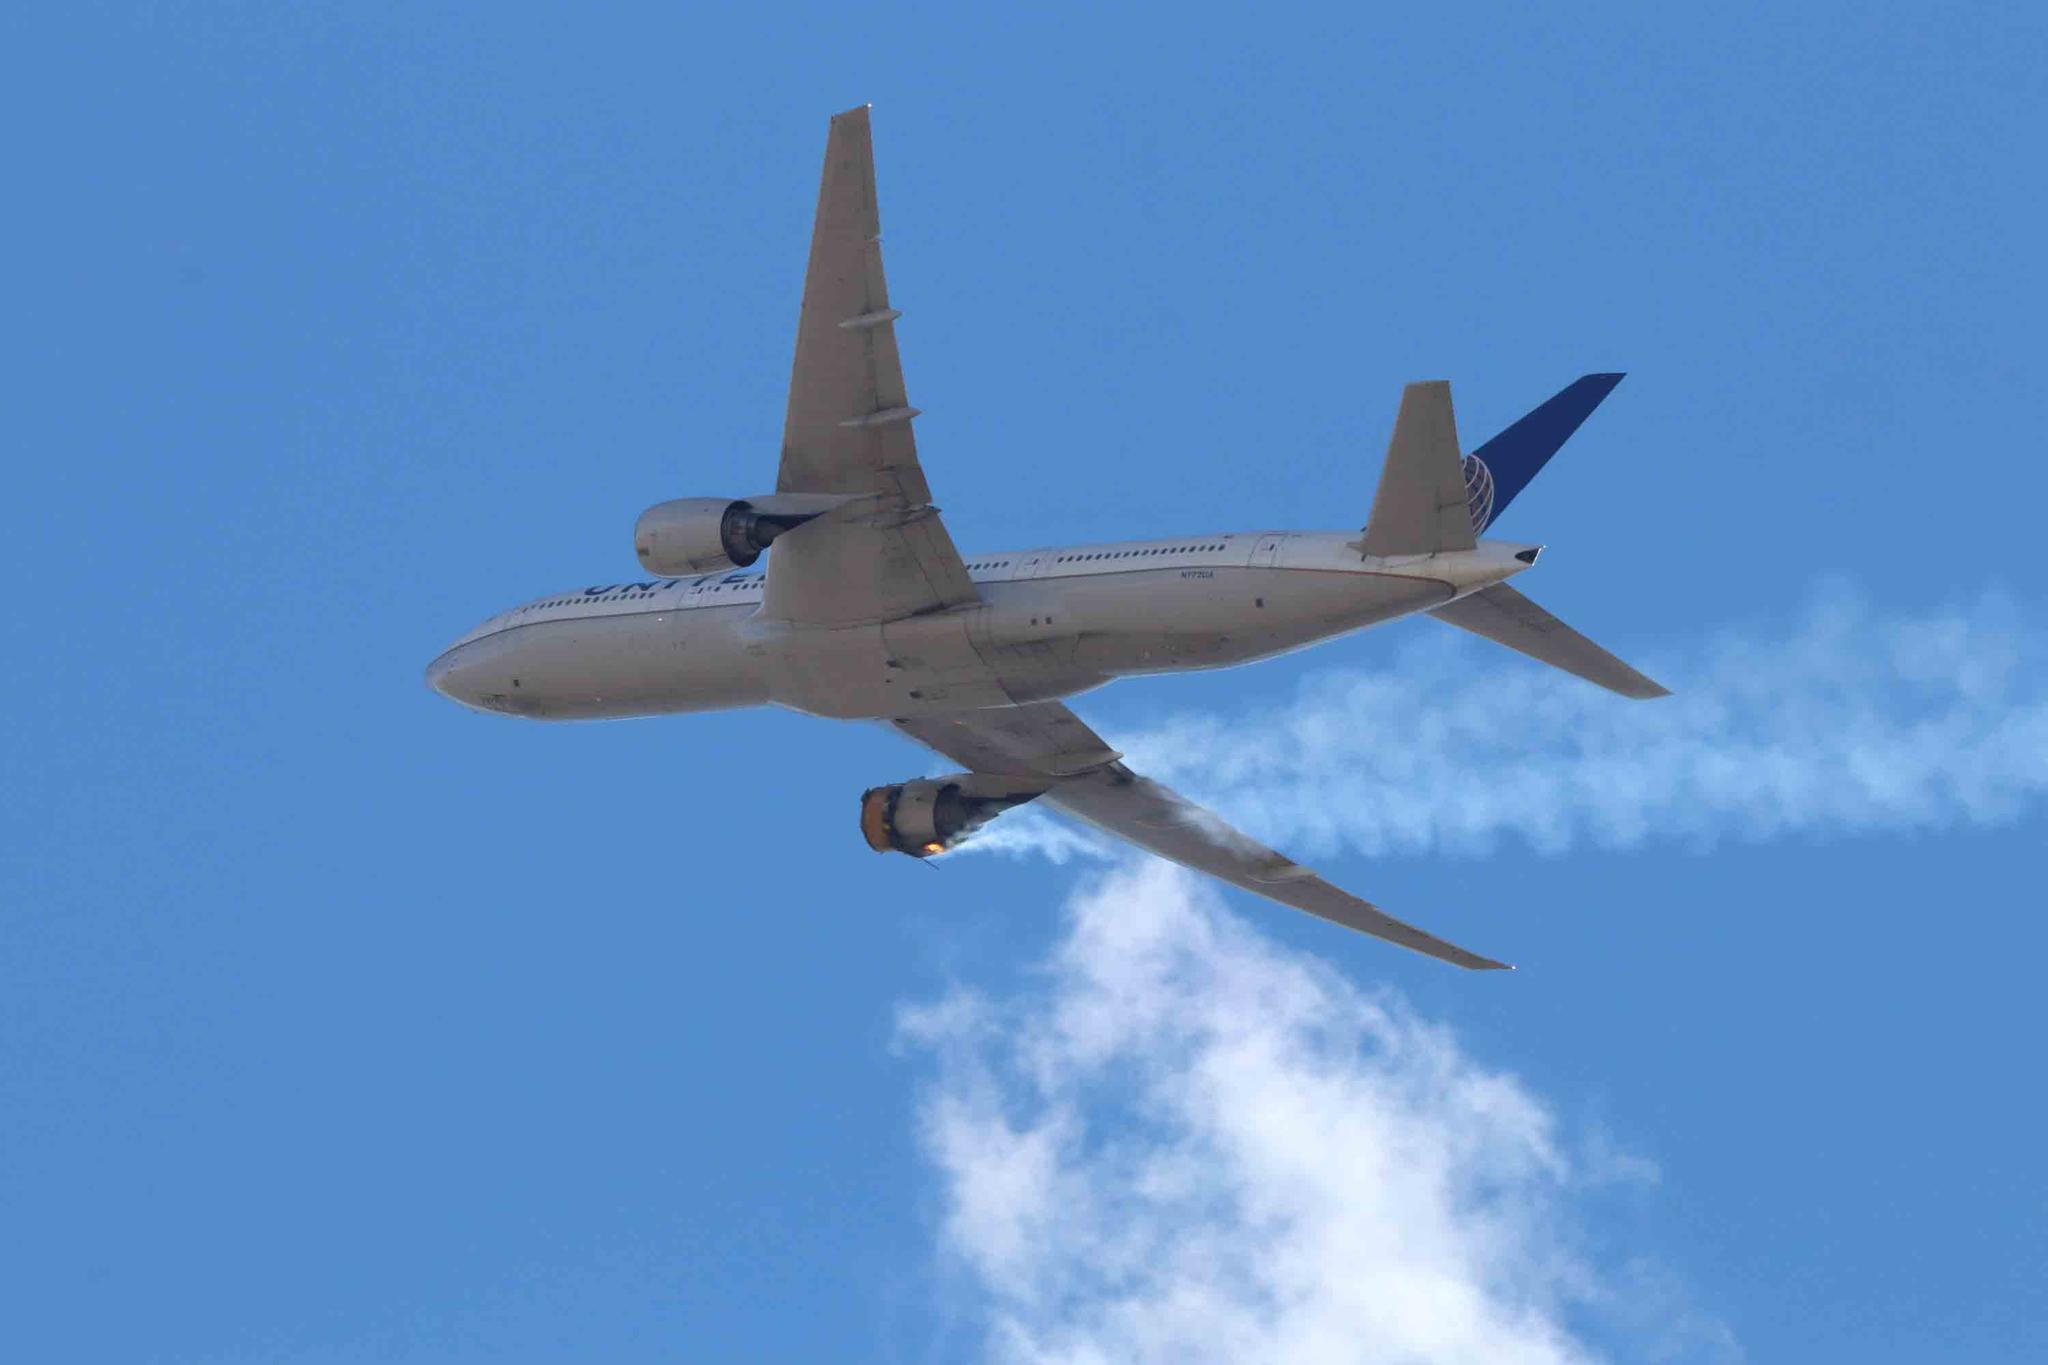 This Saturday, Feb. 20, 2021 photo provided by Hayden Smith shows United Airlines Flight 328 approaching Denver International Airport, after experiencing "a right-engine failure" shortly after takeoff from Denver.